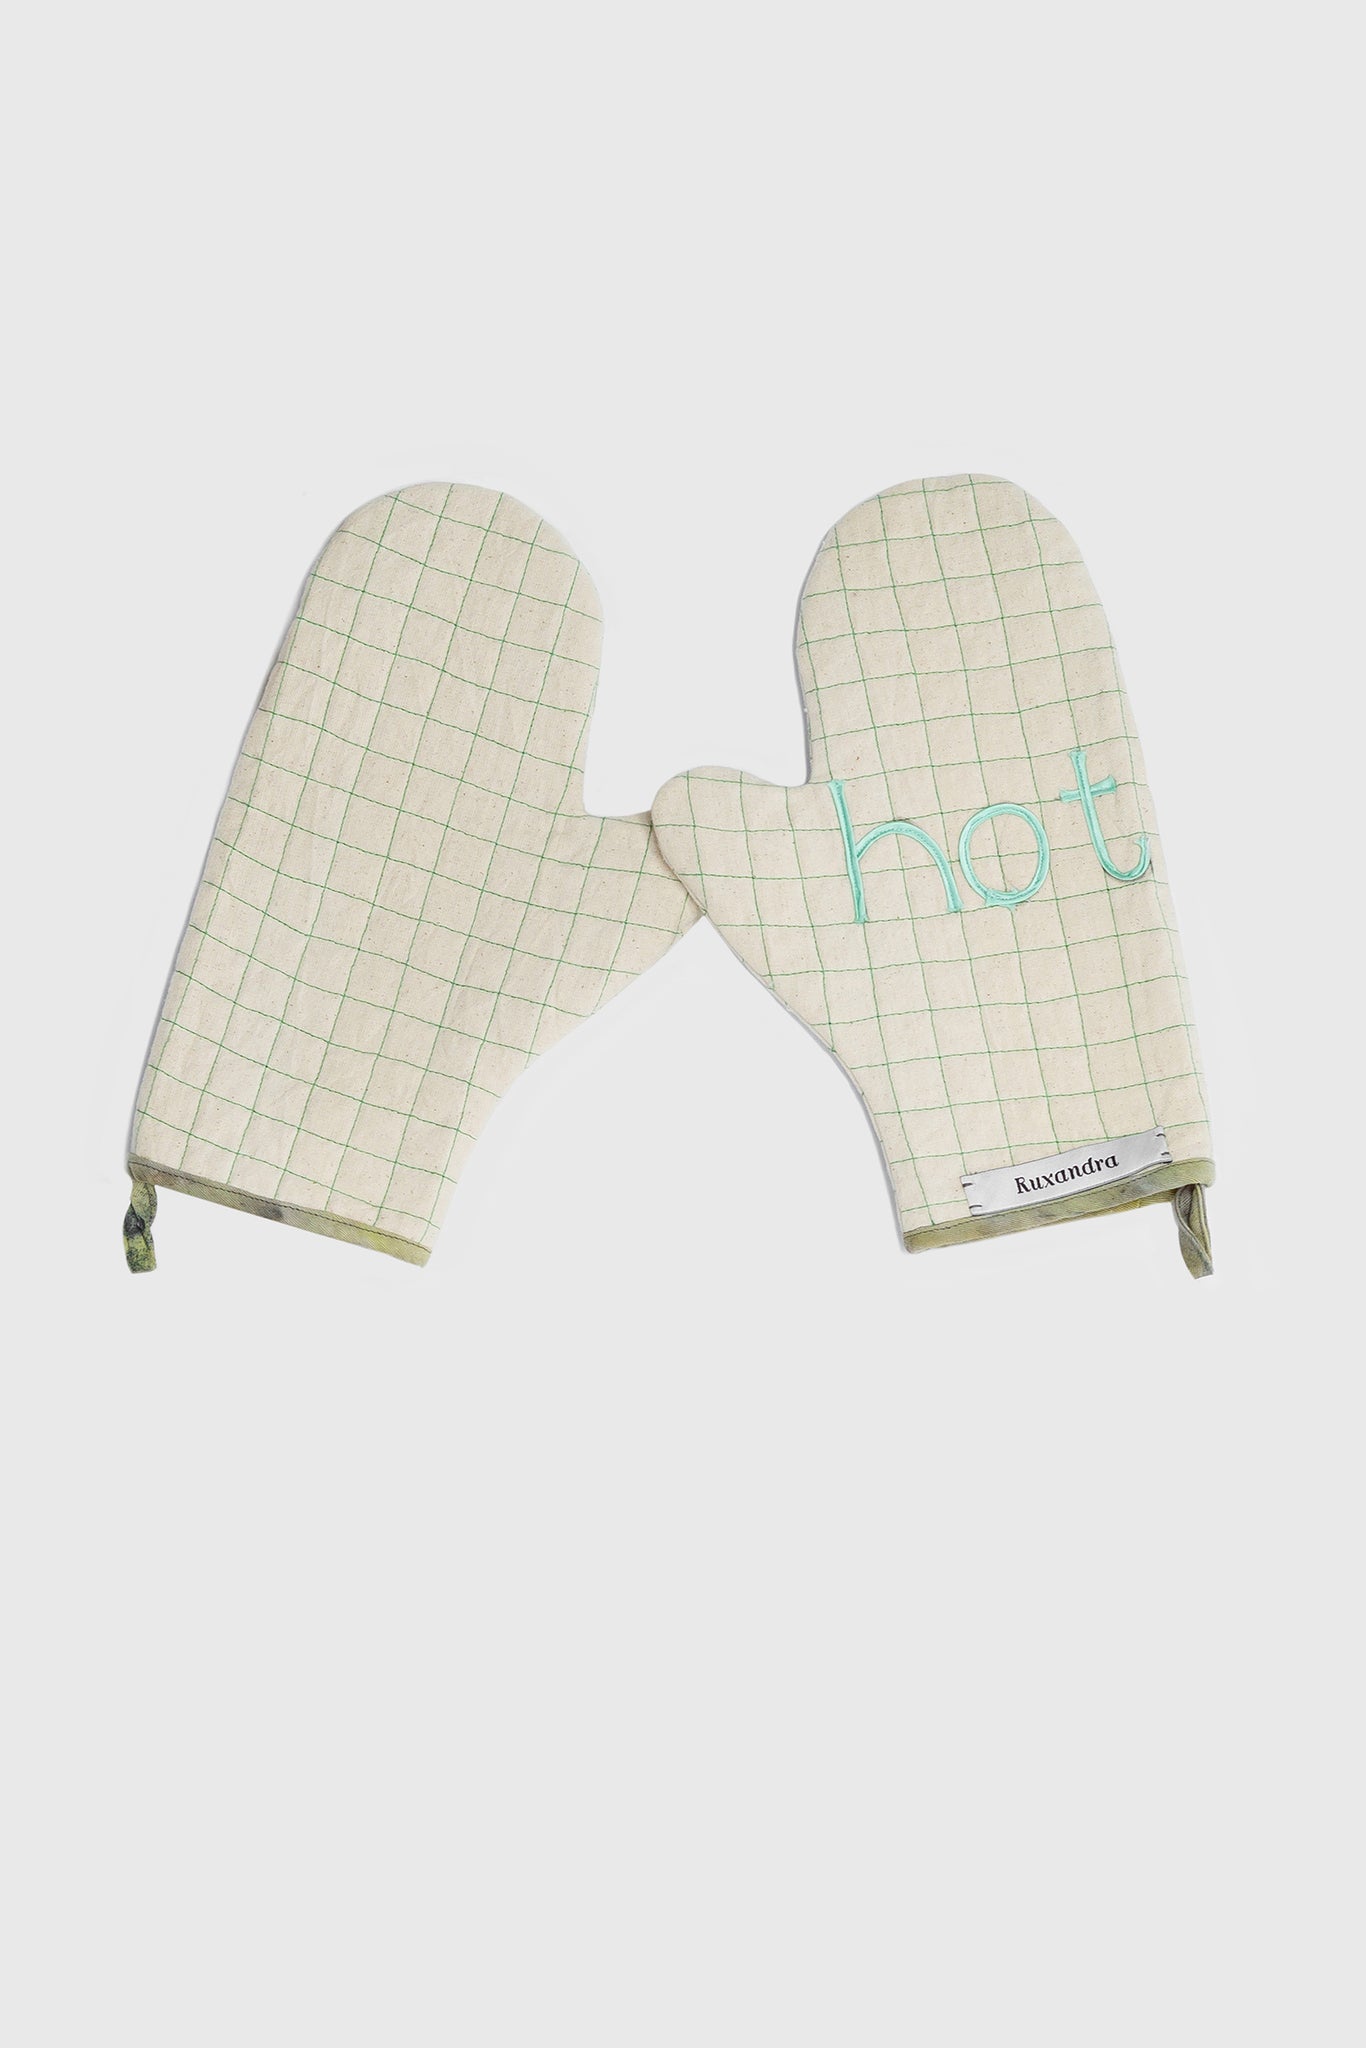 Quilted Oven Mitts, sold as pair, fun message , hot written on them, from cotton, 100% natural, heat resistant, chic home accessory, for hot wives, feel good in the kitchen style, 